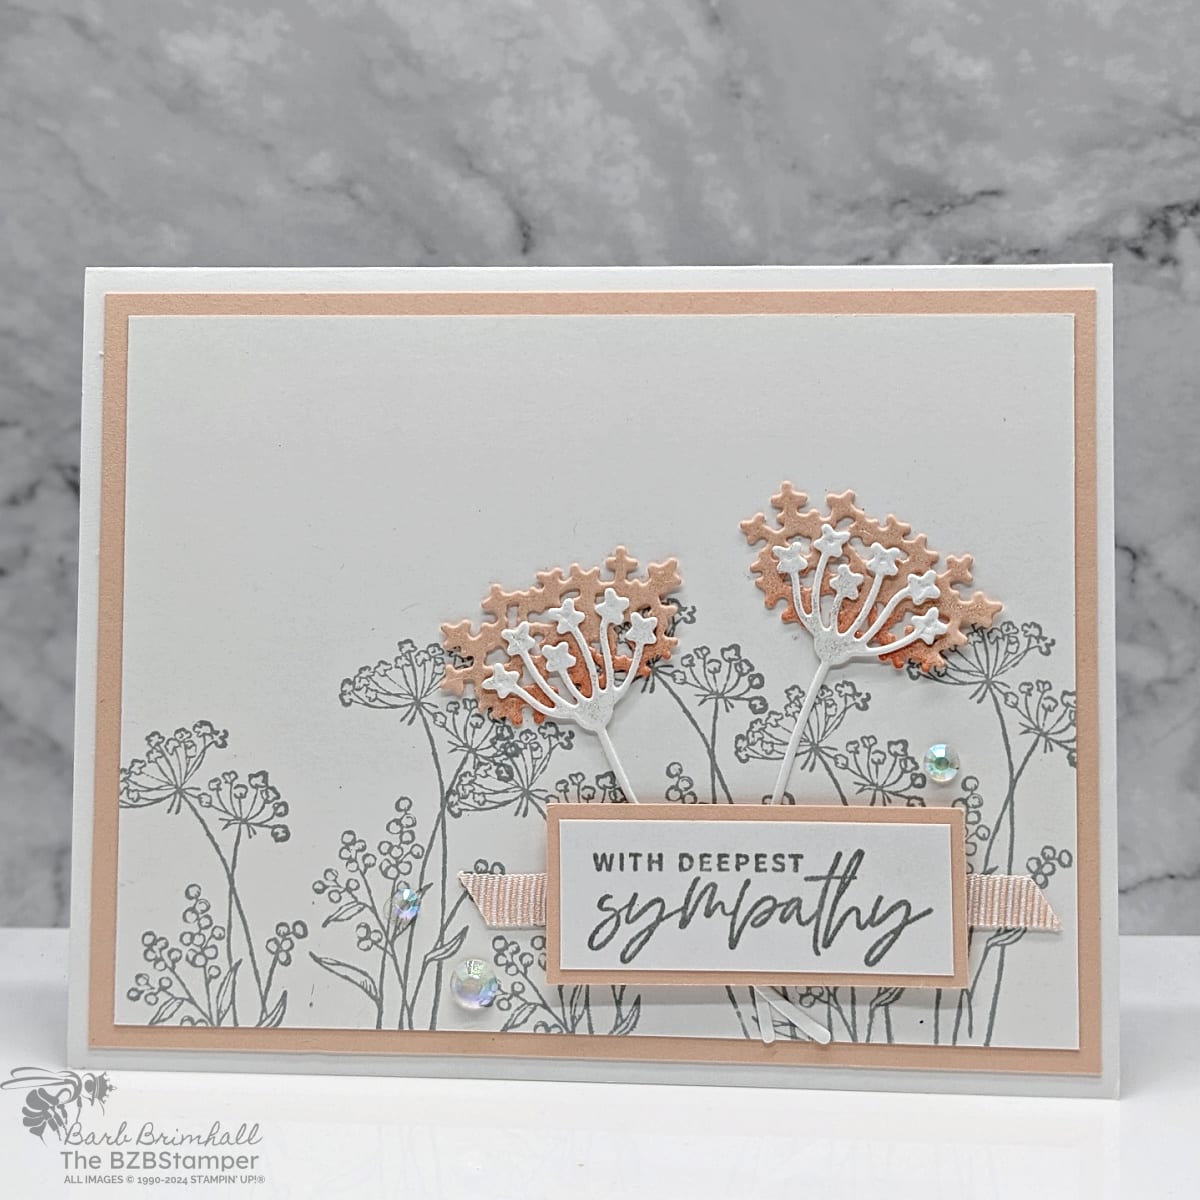 Sympathy Card using the Dainty Delight Stamp Set featuring flowers in gray and coral with a "deepest sympathy" sentiment.